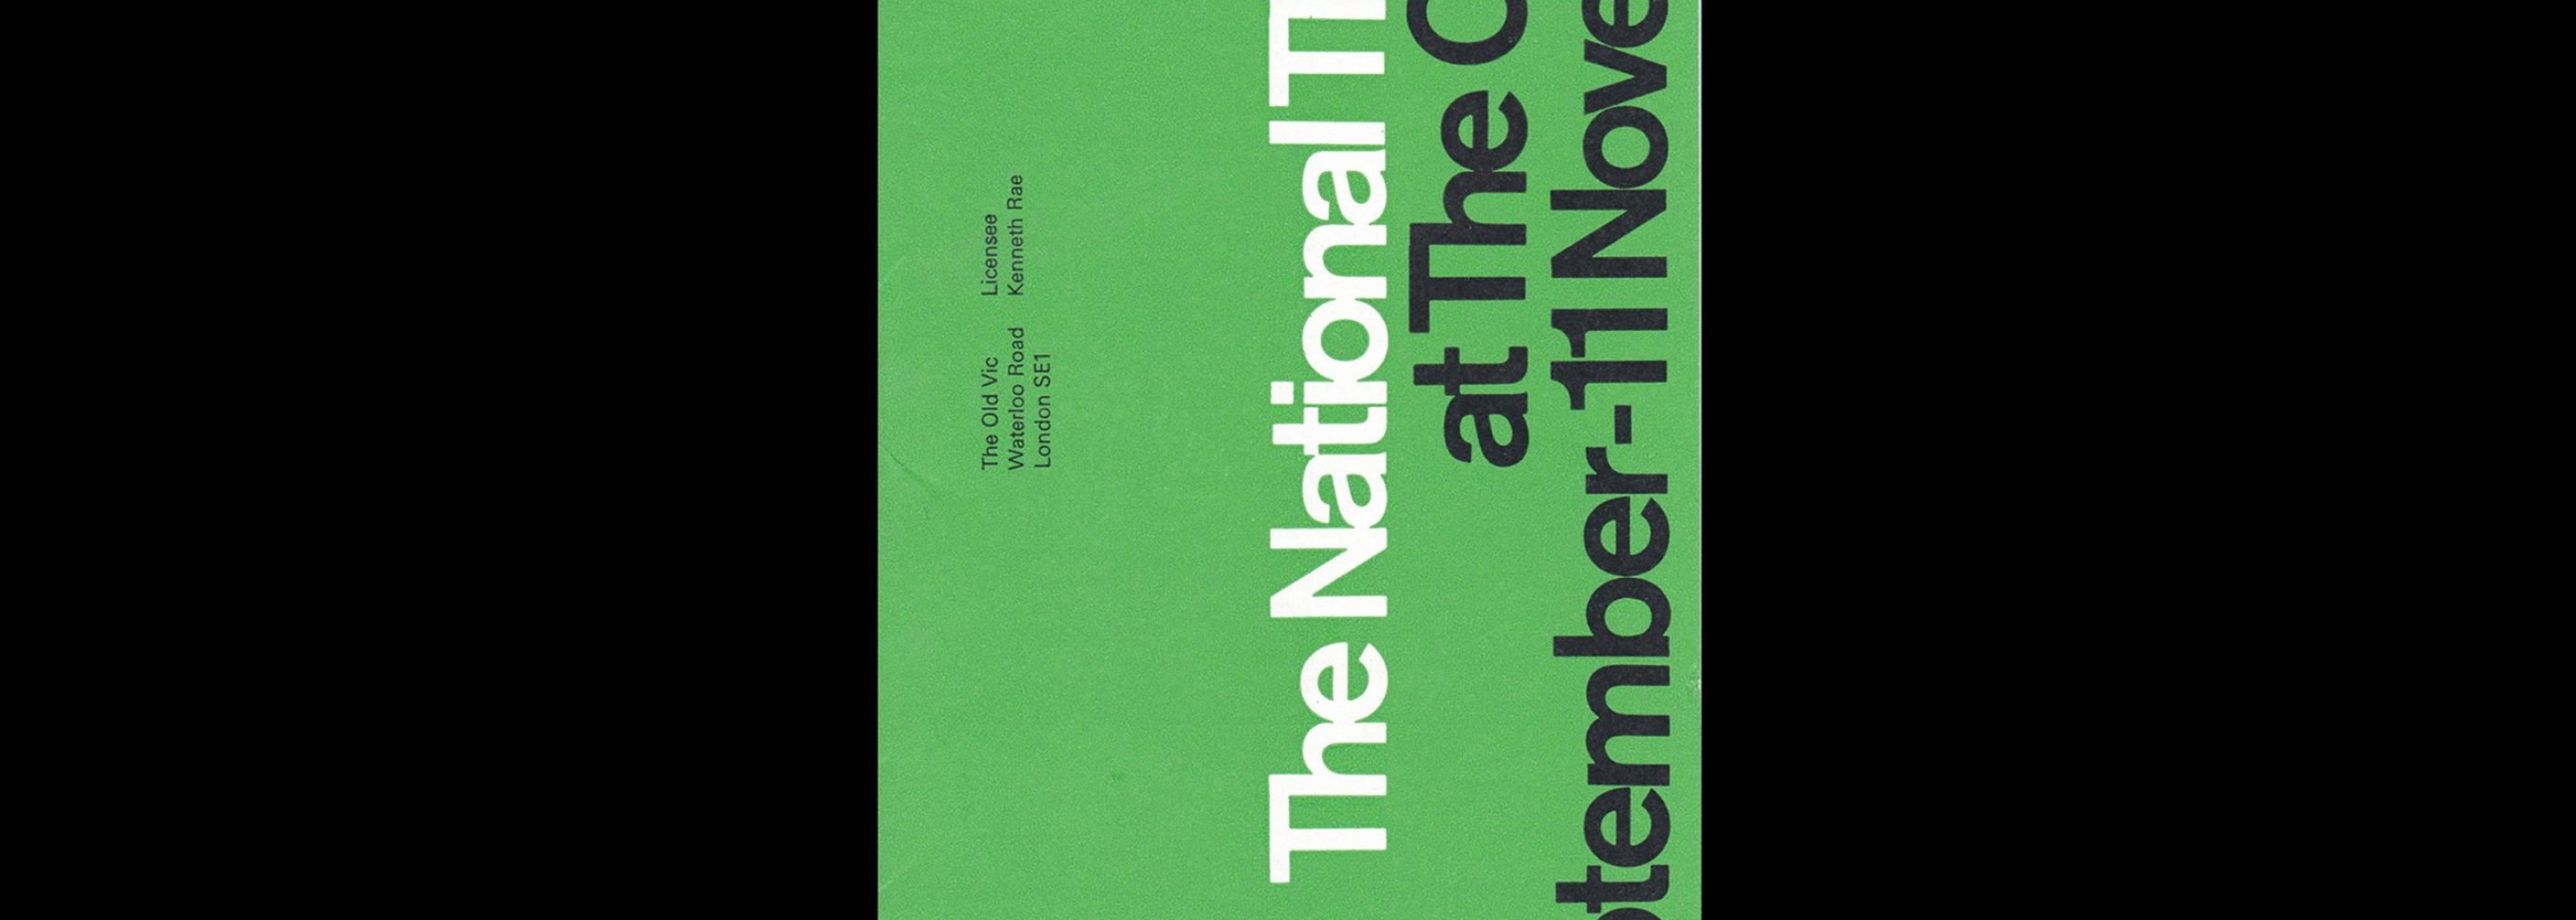 The National Theatre 1967/68 Booking Period Programme. Designed by Ken Briggs